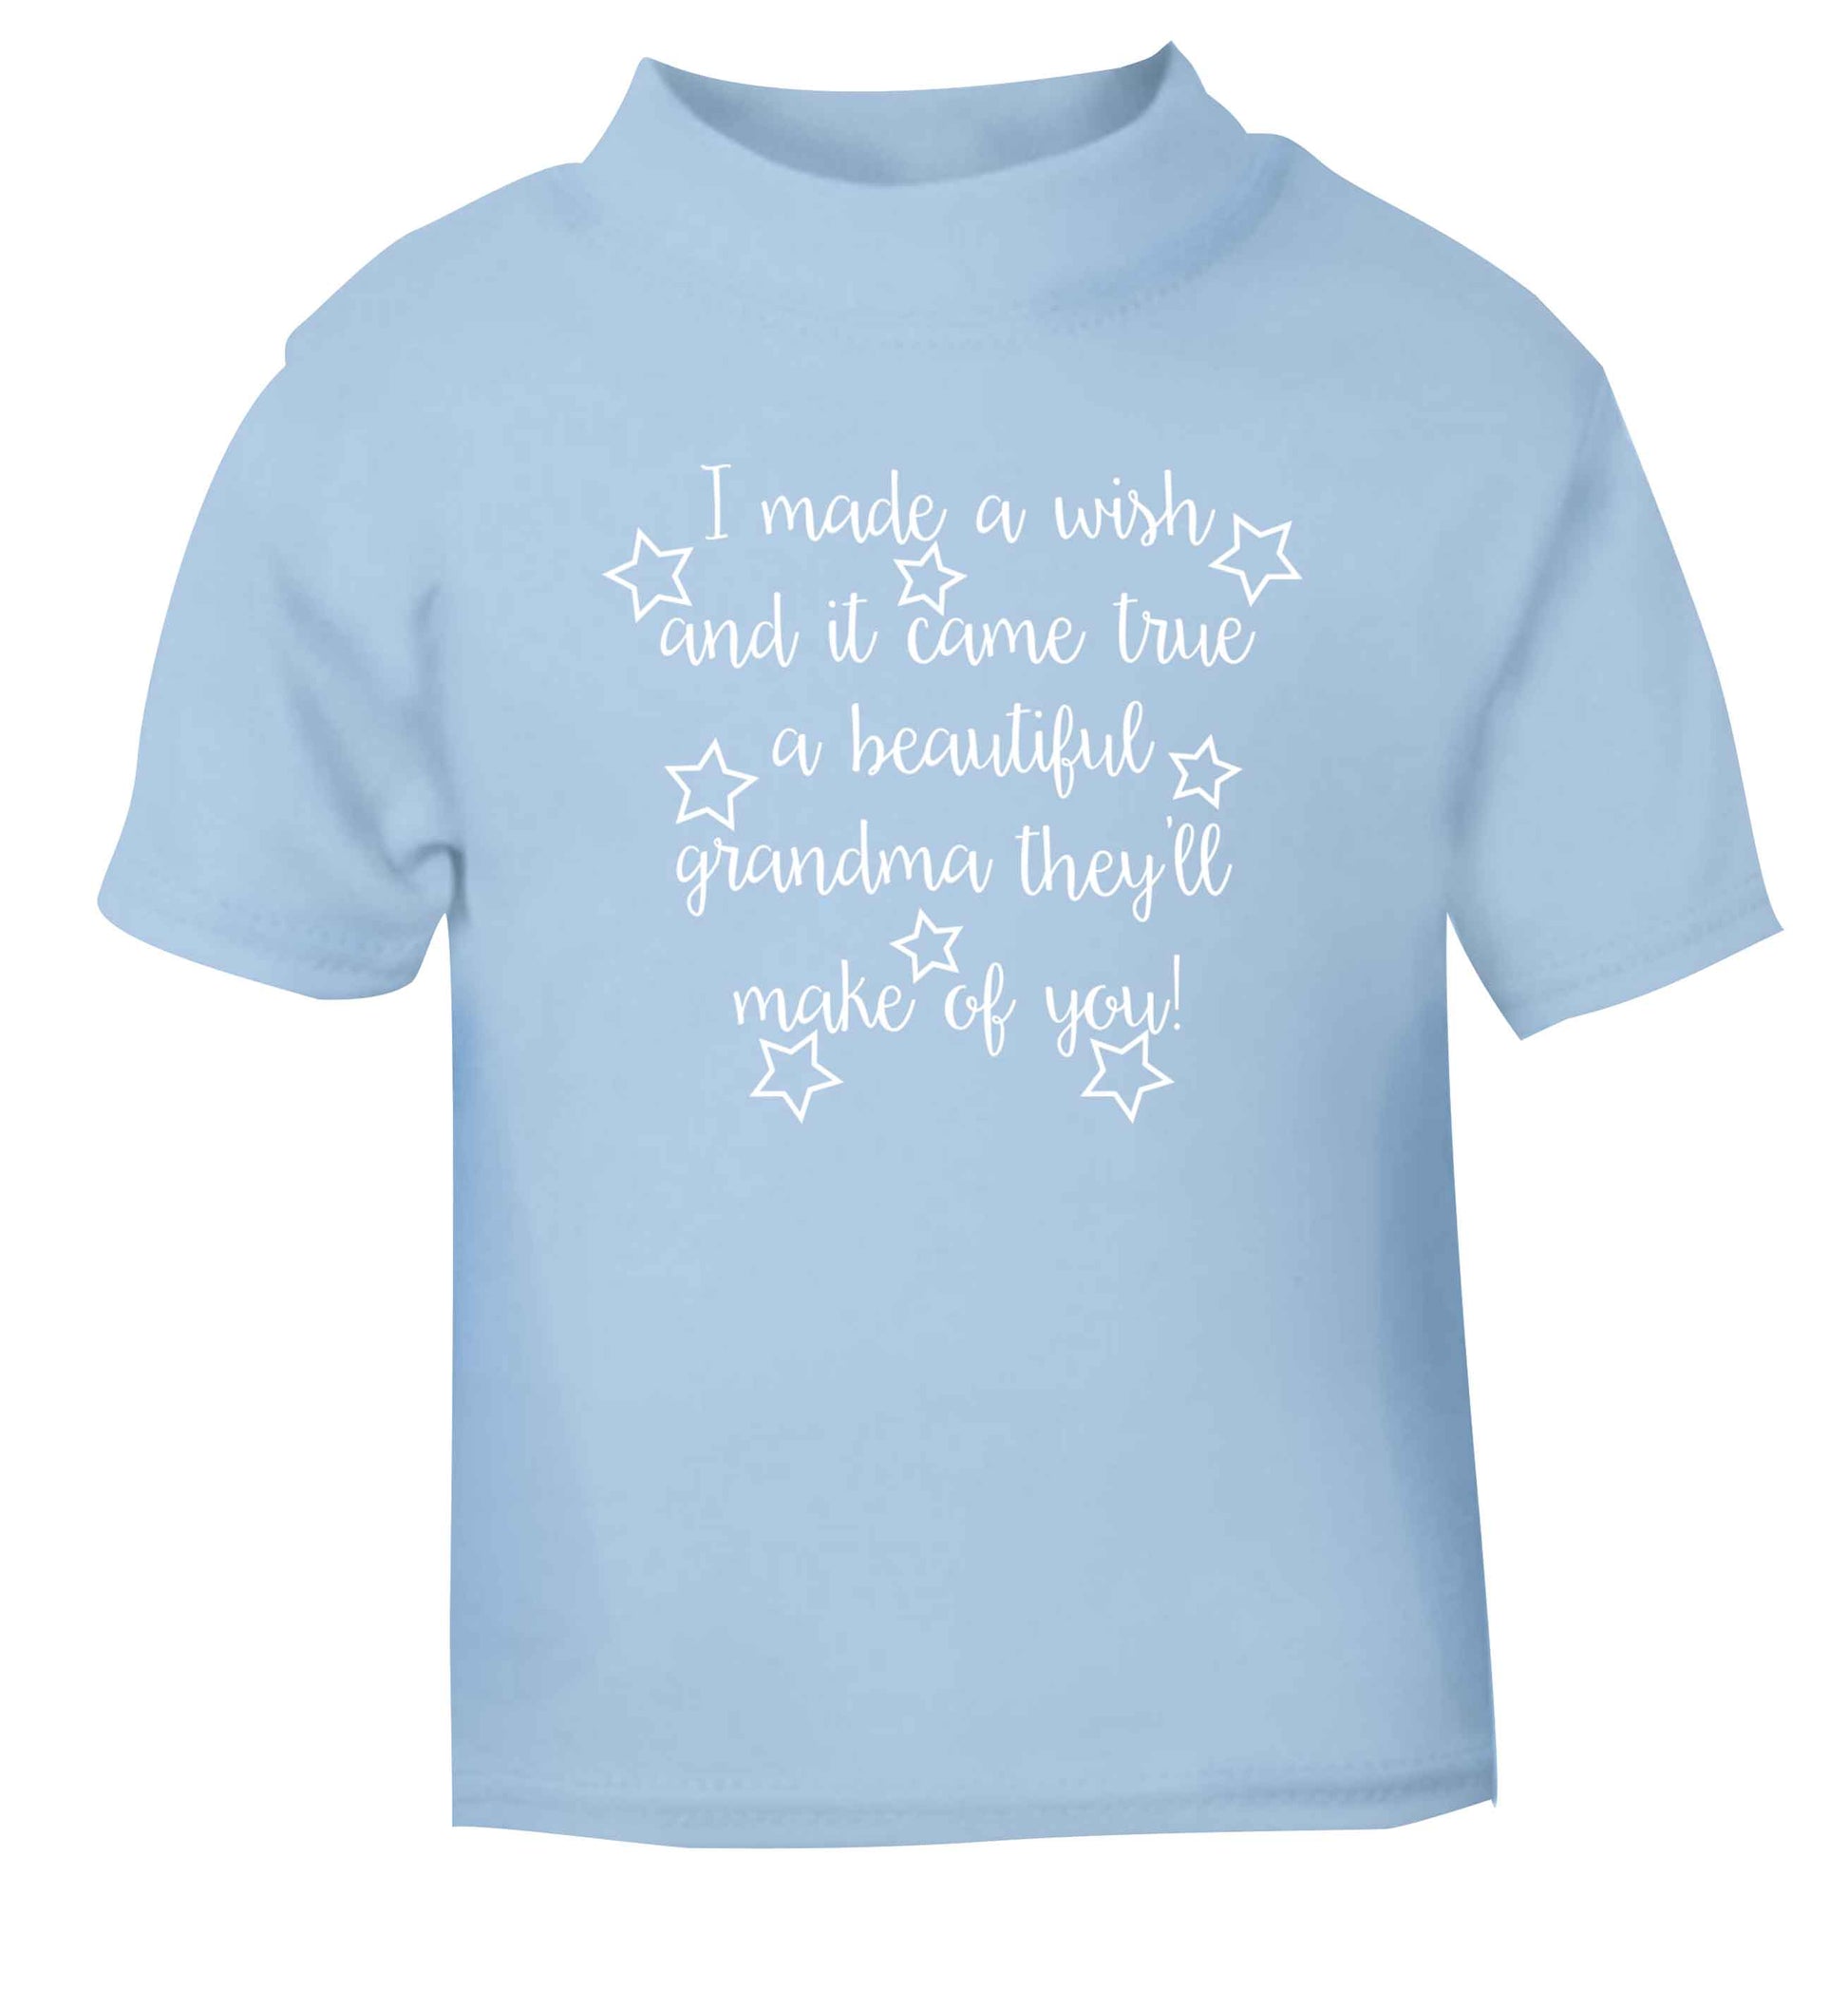 I made a wish and it came true a beautiful grandma they'll make of you! light blue Baby Toddler Tshirt 2 Years